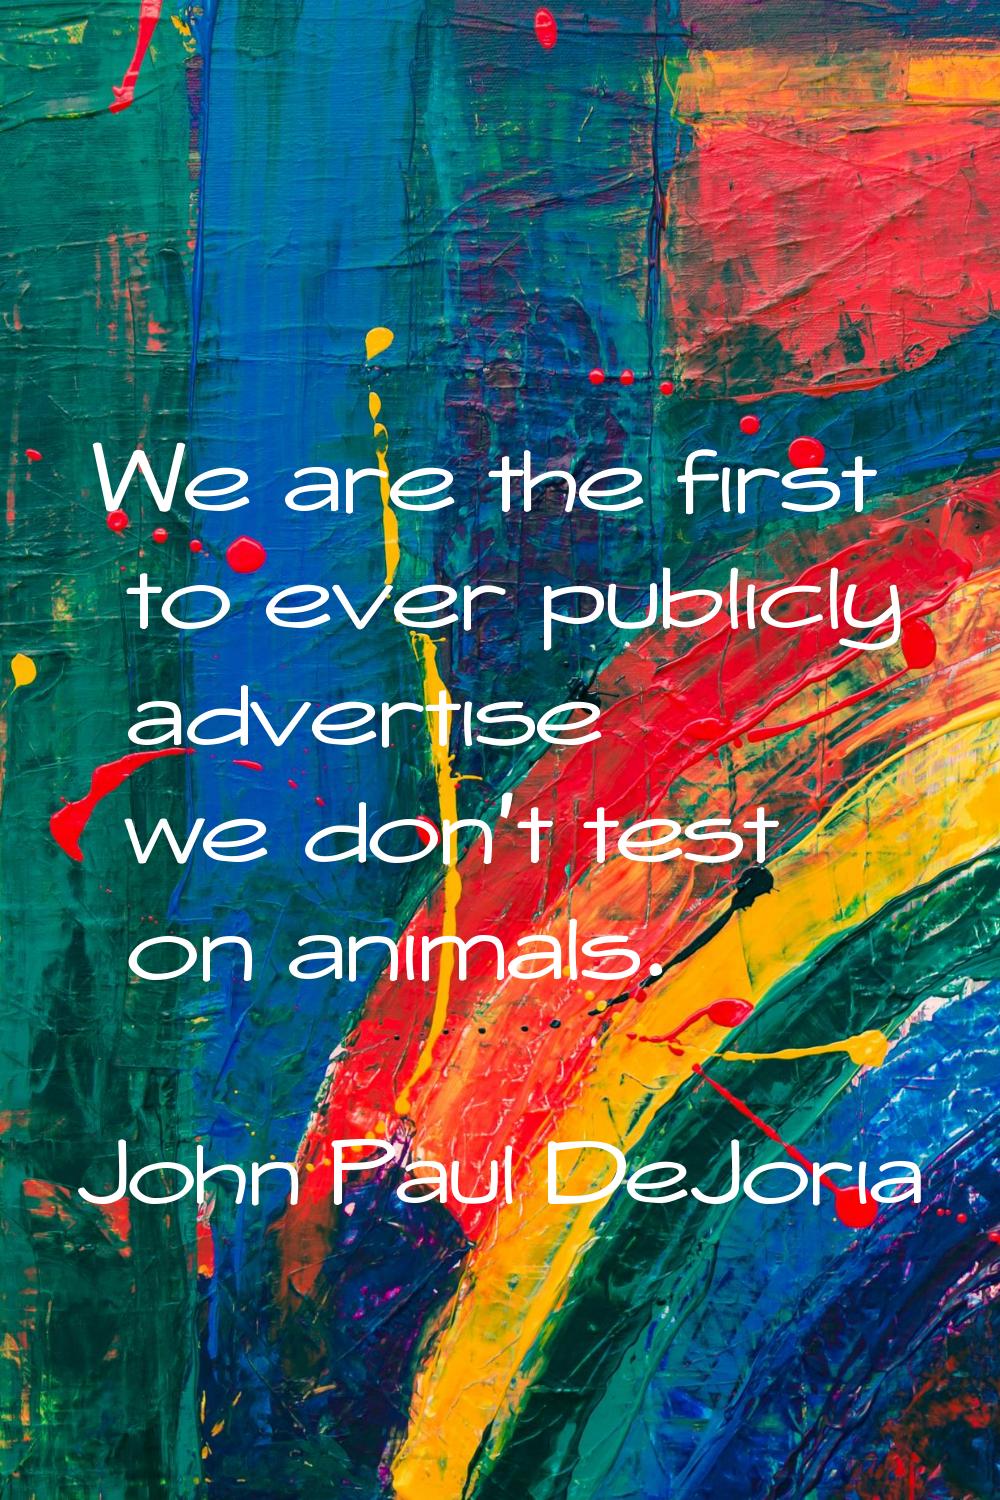 We are the first to ever publicly advertise we don't test on animals.